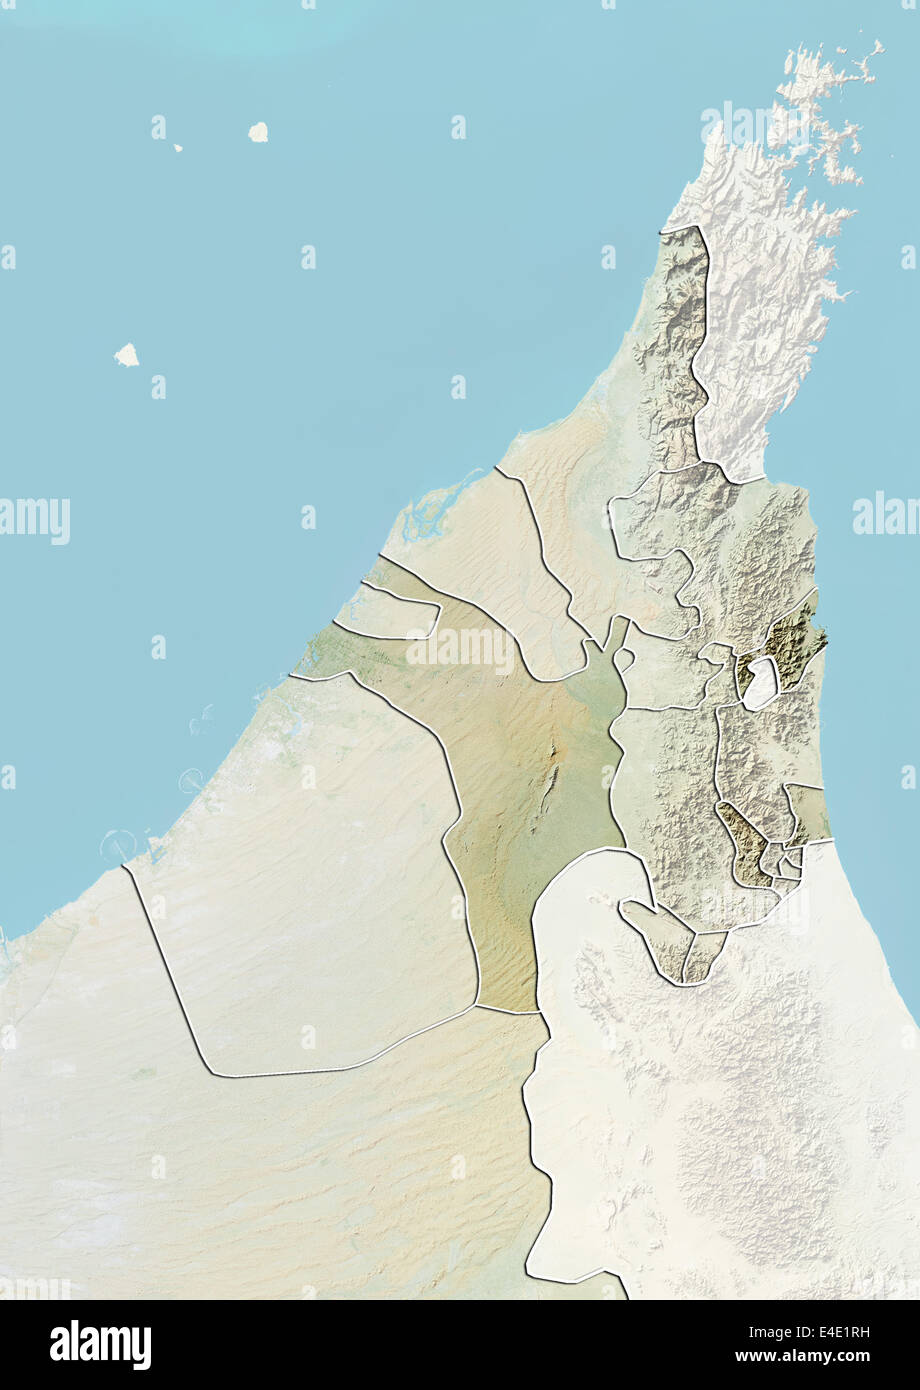 The Emirate of Sharjah and Northern UAE, Relief Map Stock Photo